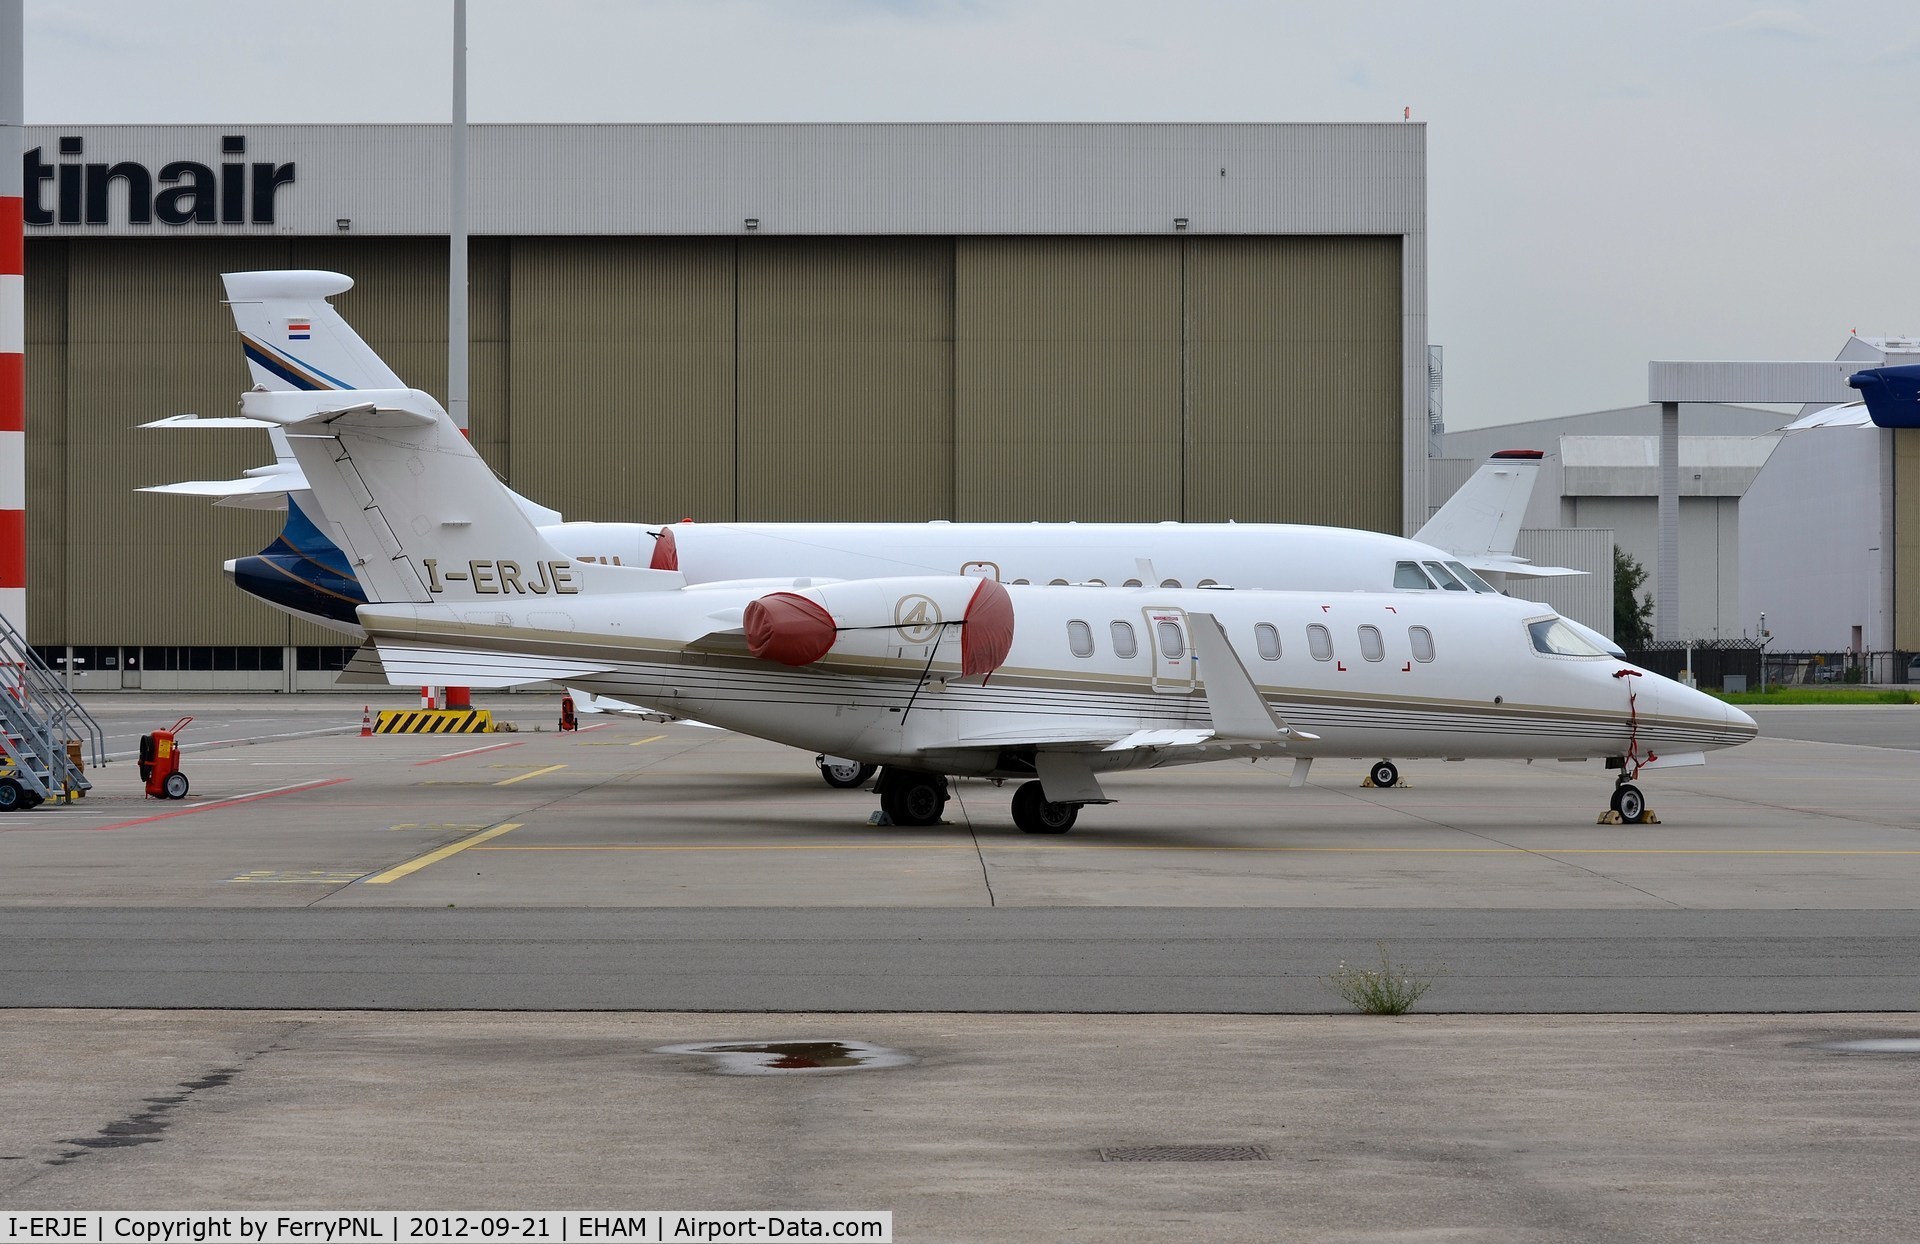 I-ERJE, 2002 Learjet 45 C/N 45-226, Temporarilly stored at AMS